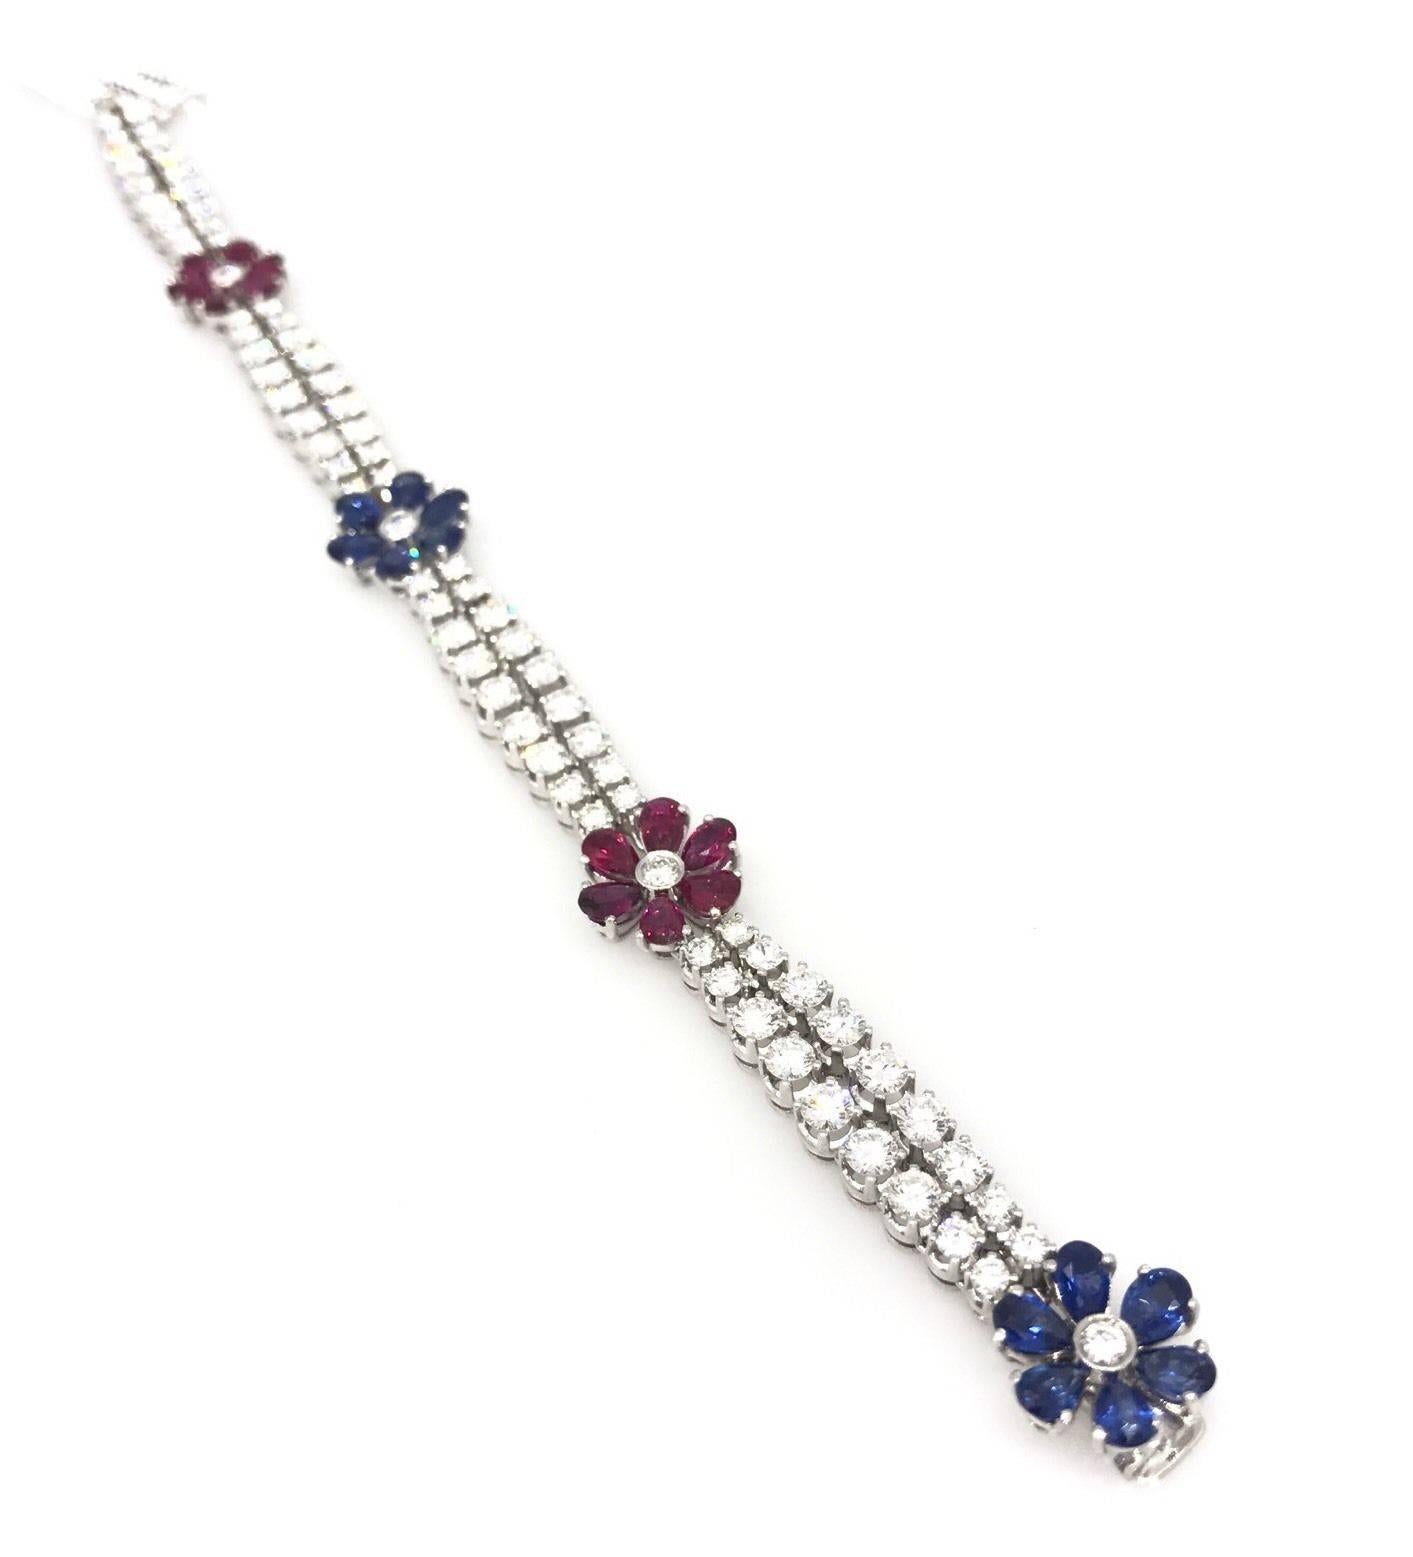 Diamond, Ruby and Sapphire bracelet in 18k white gold featuring double row of round brilliant diamonds separated by Ruby and Sapphire florets, 8.00 ct total diamond weight. Diamond quality graded as VS2 in clarity, H in color.

12 Pearshaped Rubies